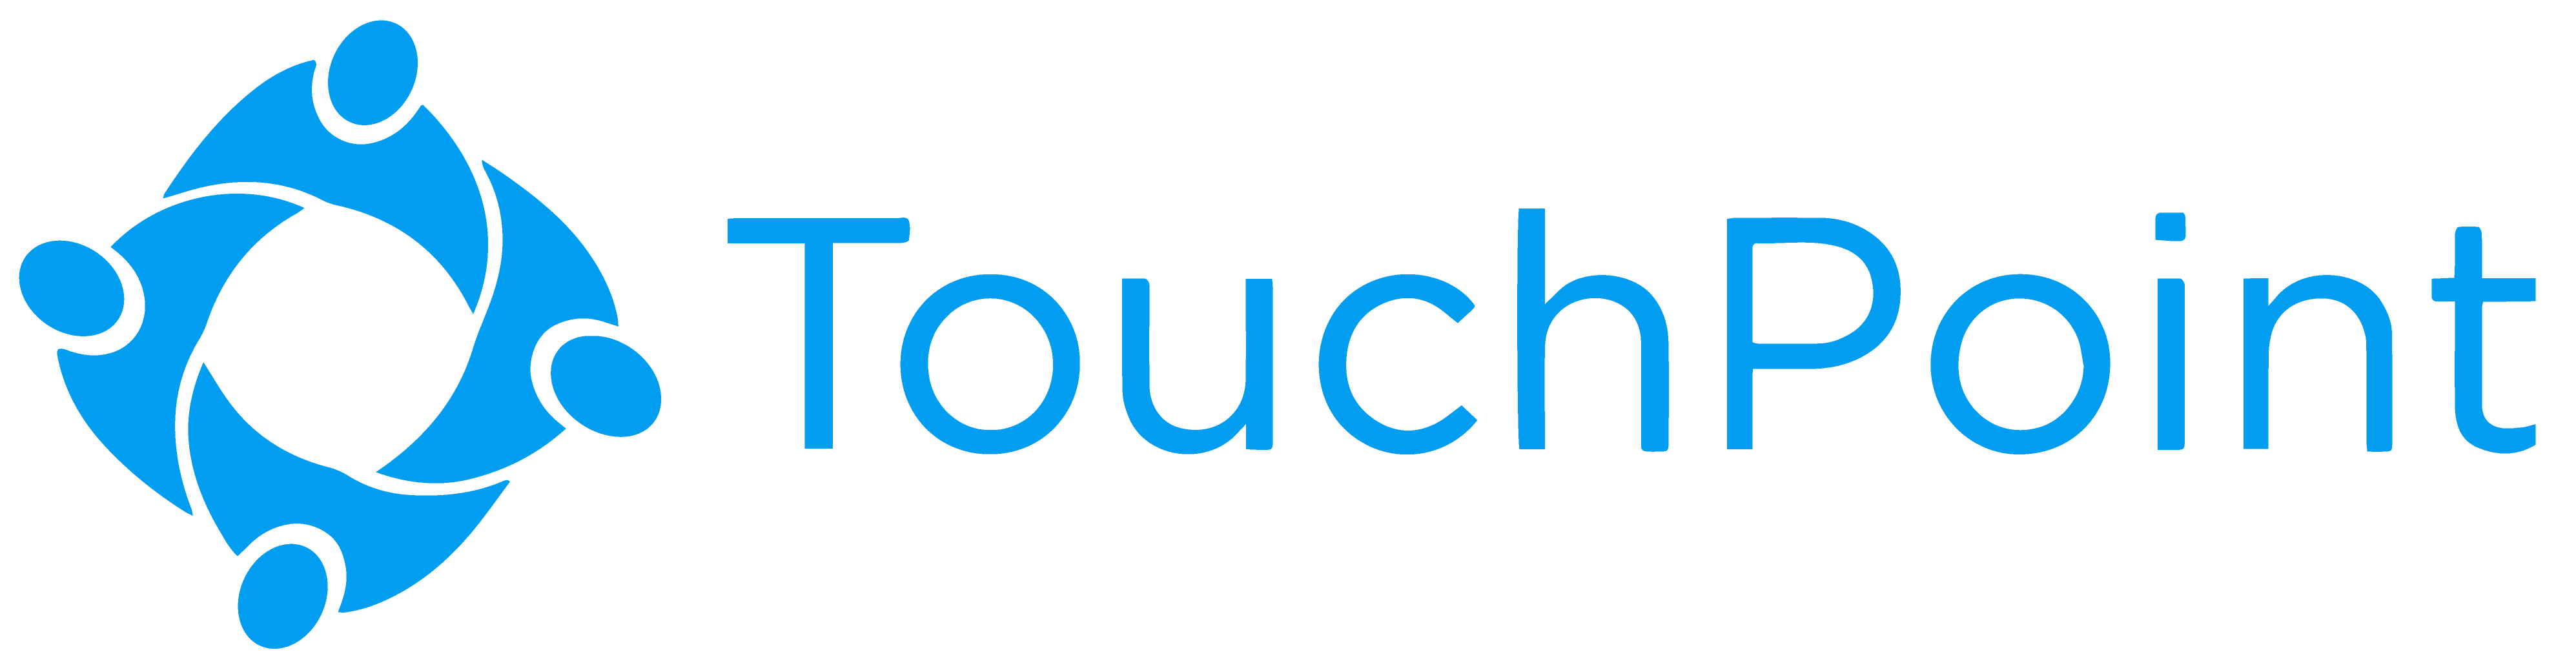 TouchPoint Church